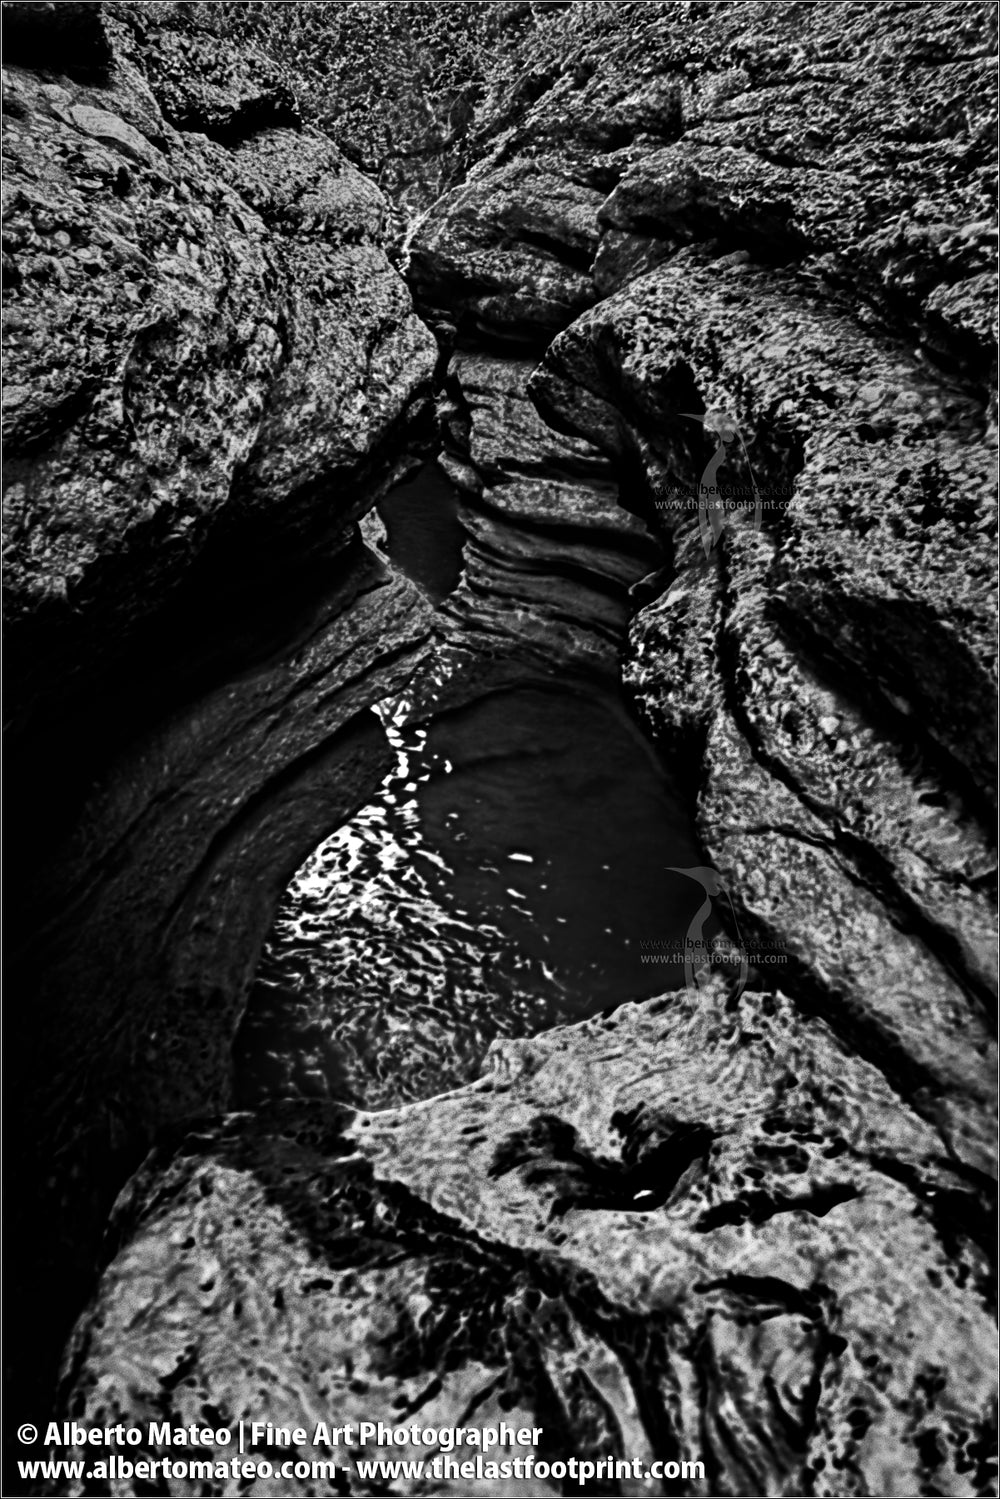 Rock detail, Pyrenees, Spain, Abstract Landscape Series.